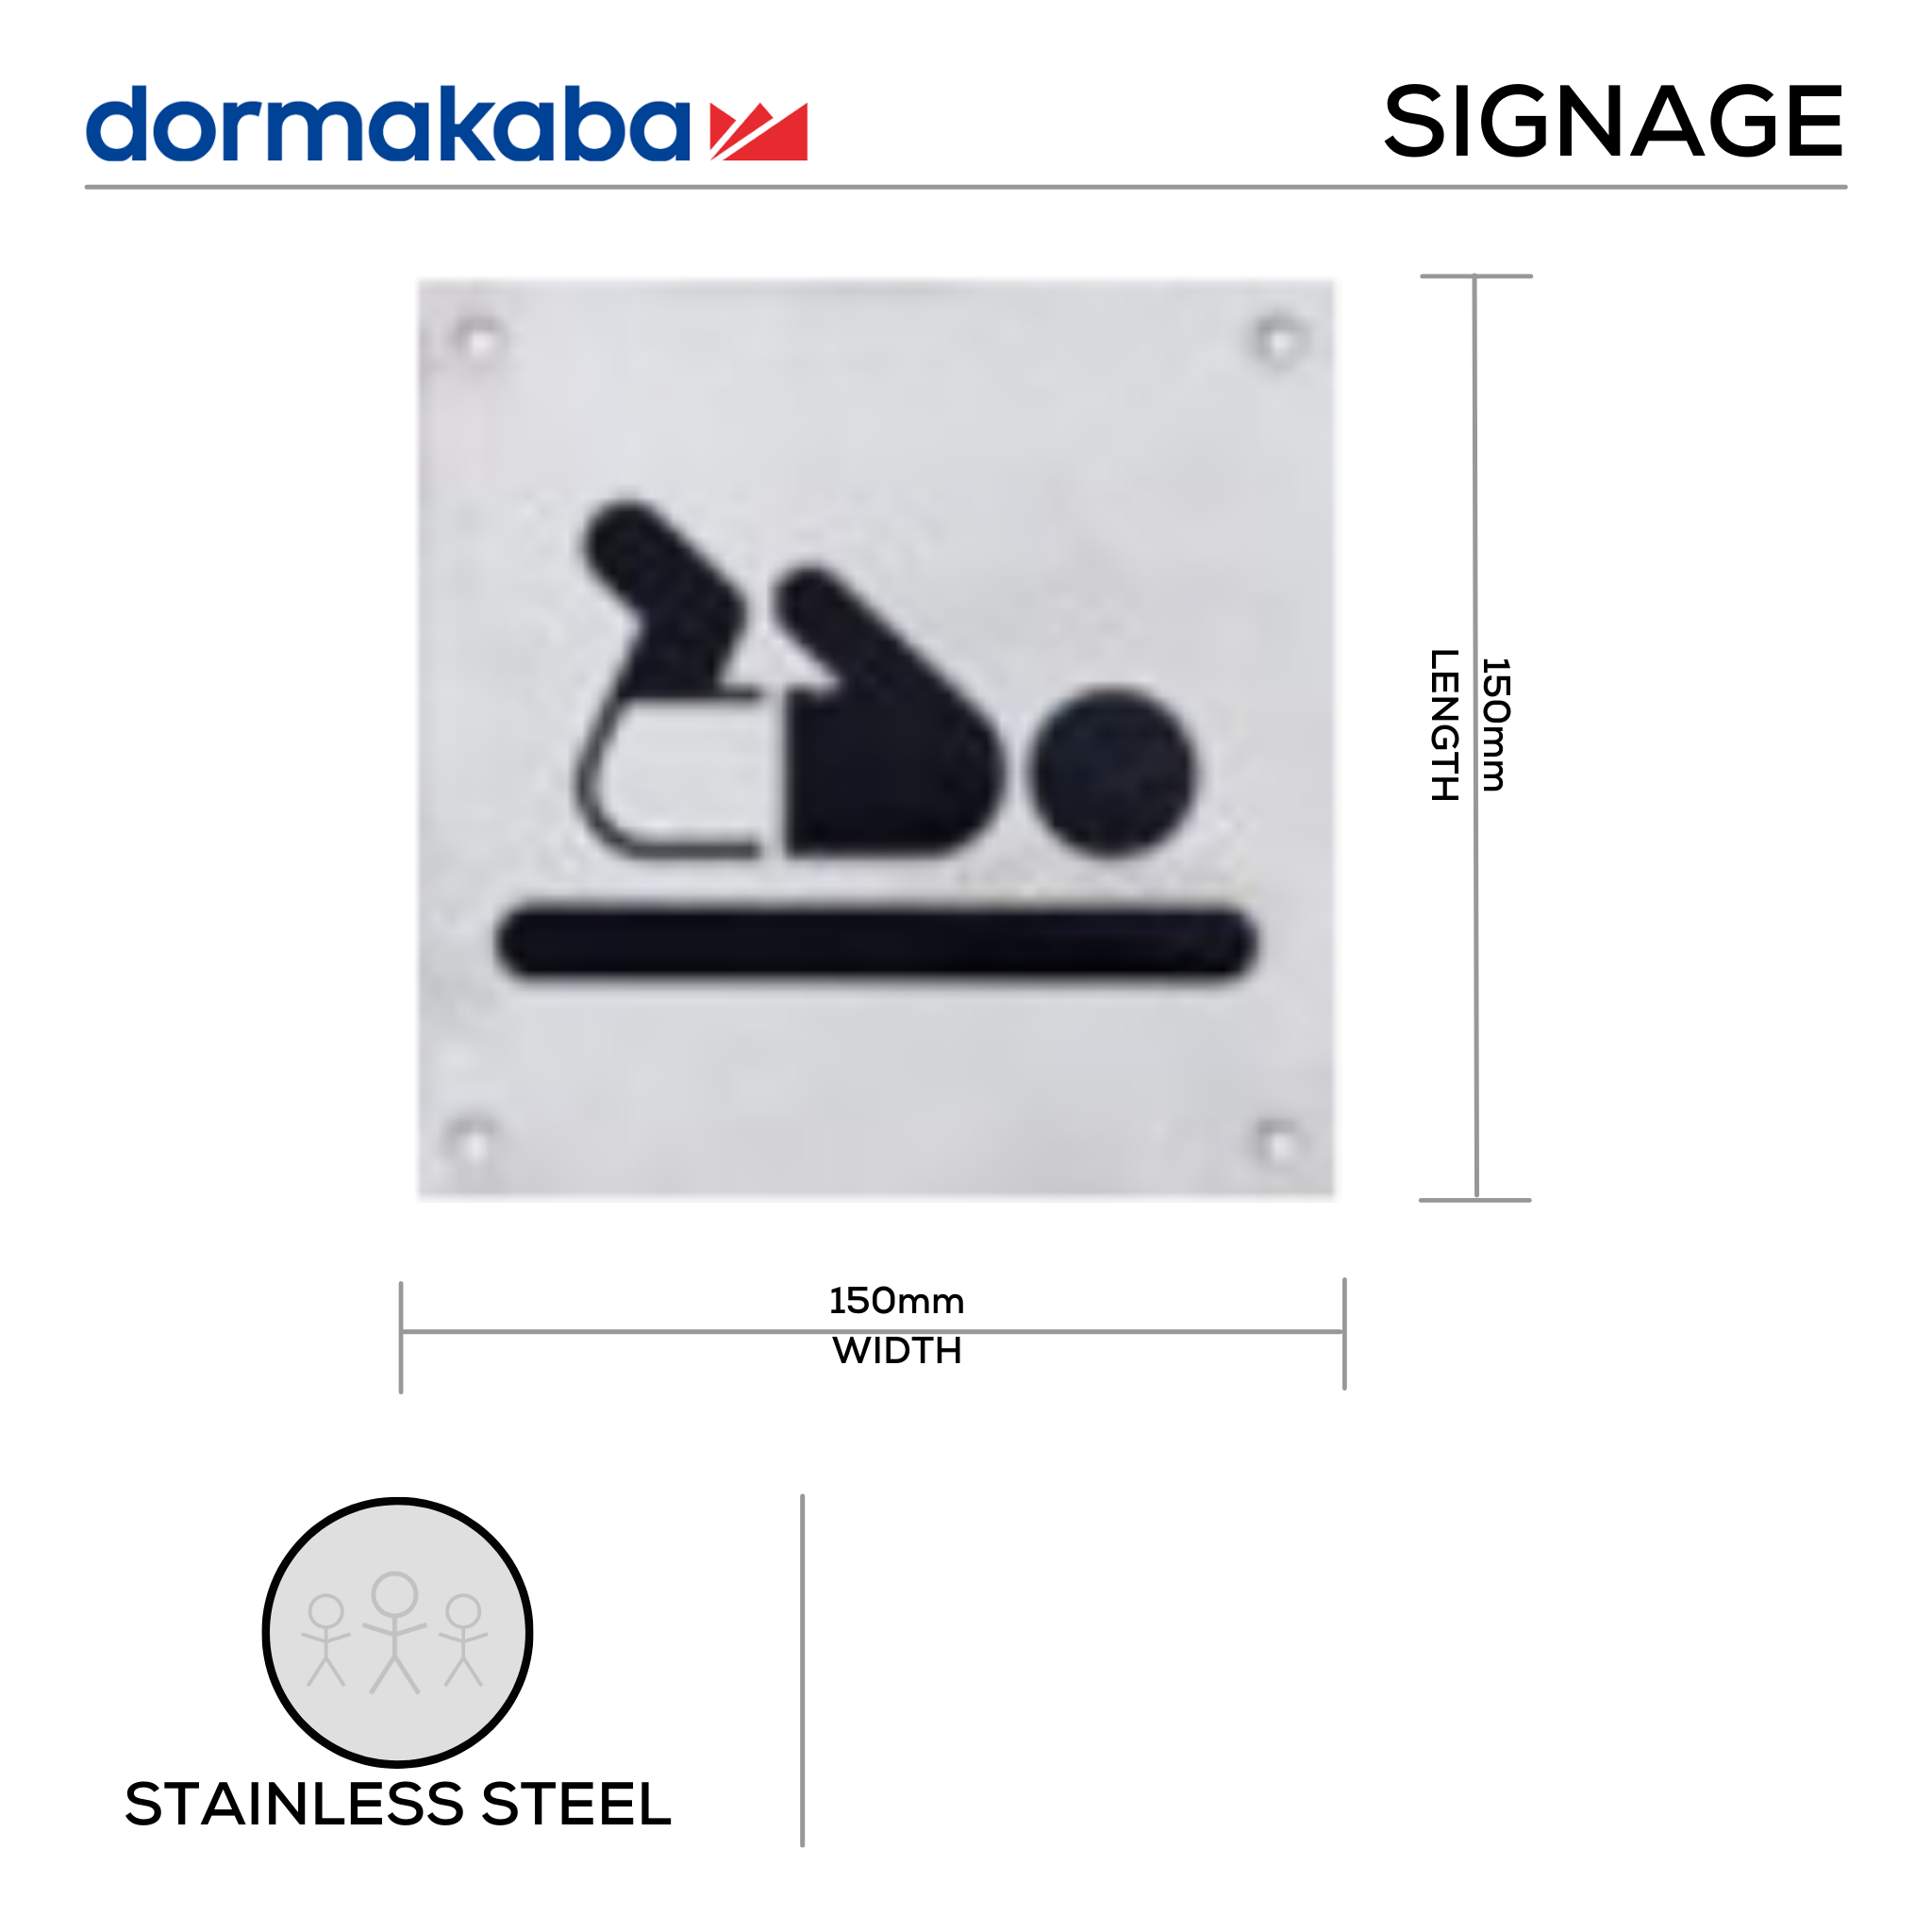 DSS-134, Door Signage, Baby Change , 150mm (l), 150mm (w), 1,2mm (t), Stainless Steel, DORMAKABA